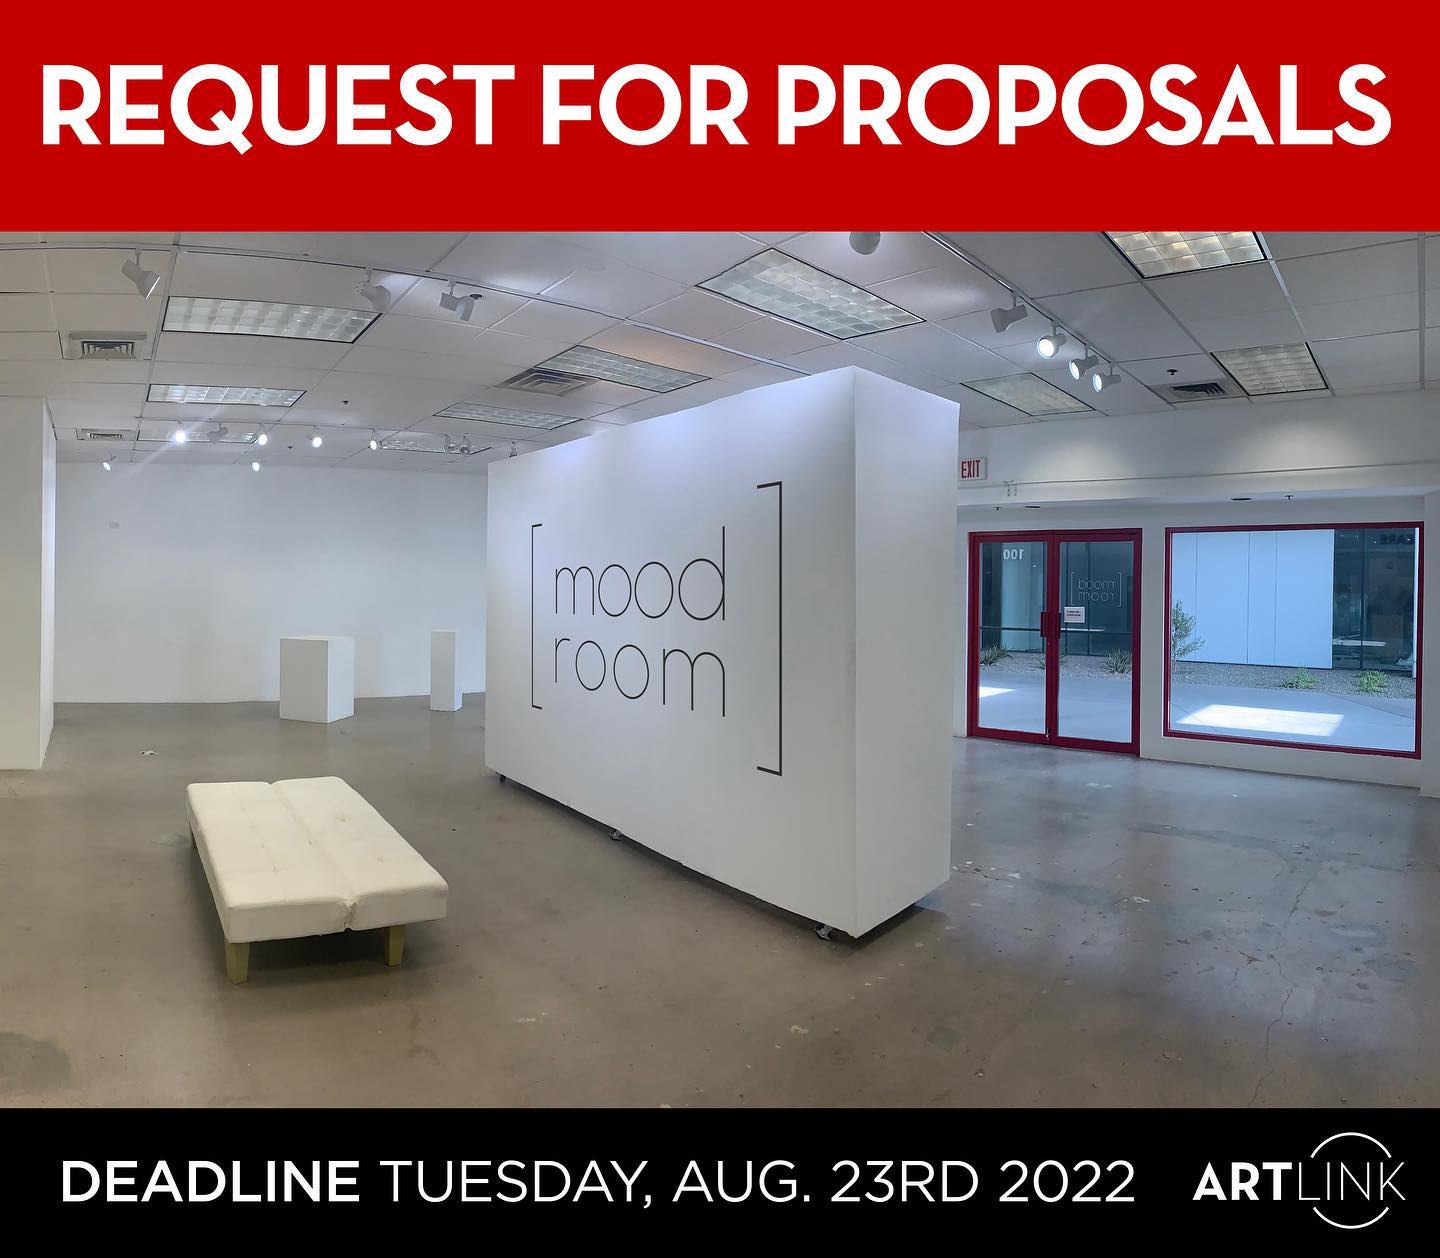 |OPEN CALL FOR SOLO OR GROUP SHOW PROPOSALS|
The @moodroomphx is now accepting proposals for programming concepts, including but not limited to solo and group show exhibitions, starting October 2022 and throughout 2023. These monthly exhibitions and experiences will be hosted at mood room, Artlink's gallery space located at Park Central, 3121 N. 3rd Ave. Phoenix, AZ 85013.

The call is open to creatives of all mediums including, but not limited to, oil, watercolor, acrylic, graphite, charcoal, pastels, photography, ceramics, printmaking, textile, mixed-media, fashion, performance, video, and sculpture/three-dimensional pieces.
 
Learn more and submit here: 
http://moodroomphx.com/exhibits/

The submission deadline is open until Tuesday August 23, 2022.